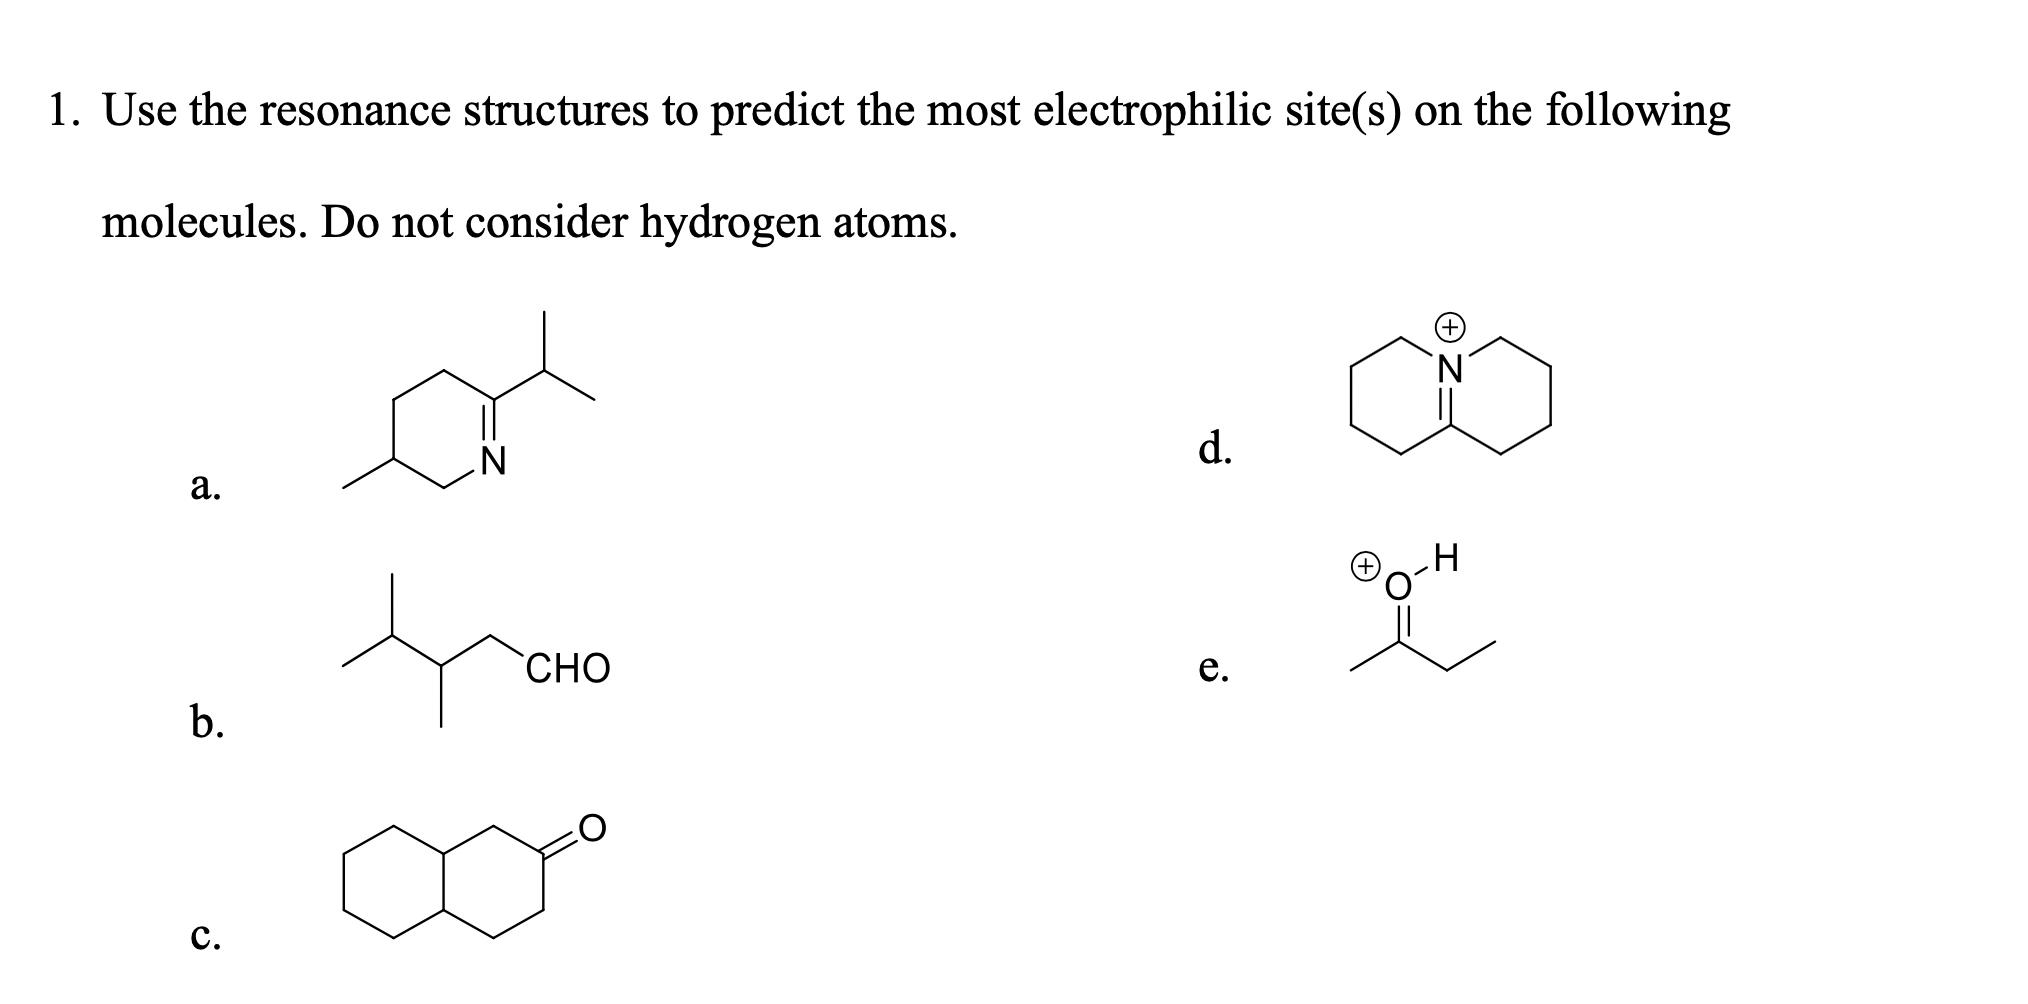 1. Use the resonance structures to predict the most electrophilic site(s) on the following molecules. Do not